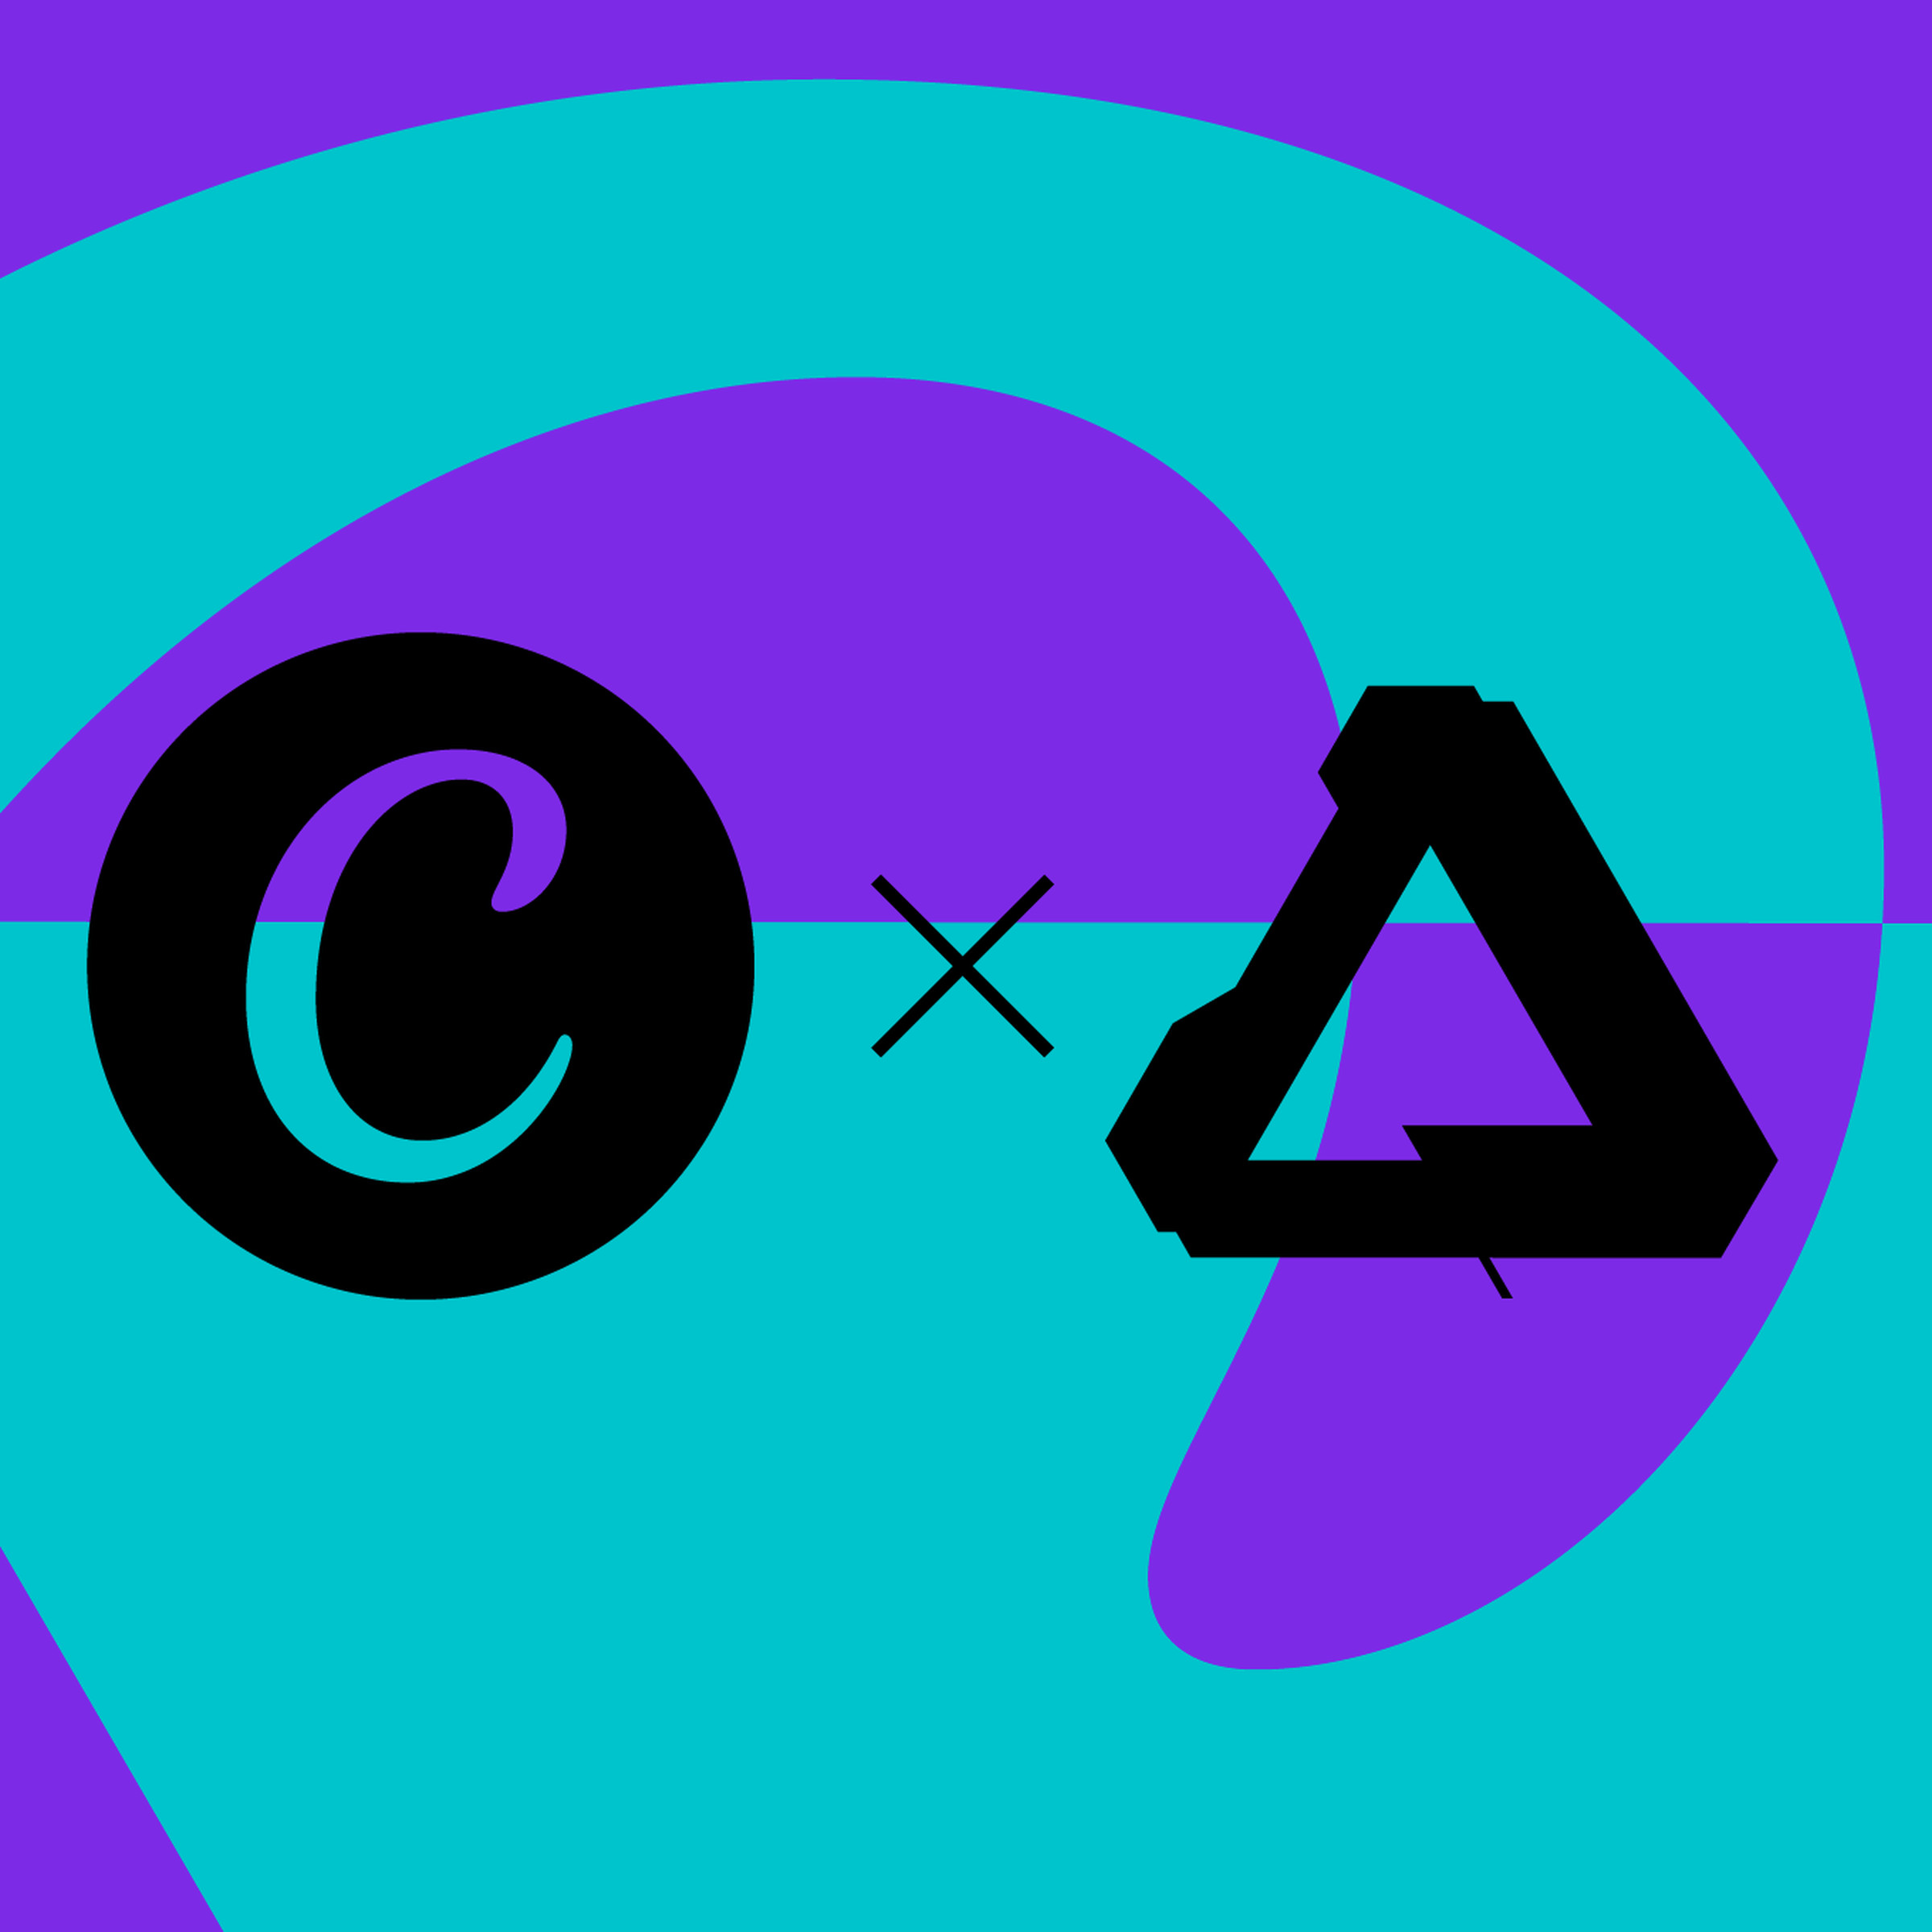 Illustration of the Canva and Affinity logos next to each other.